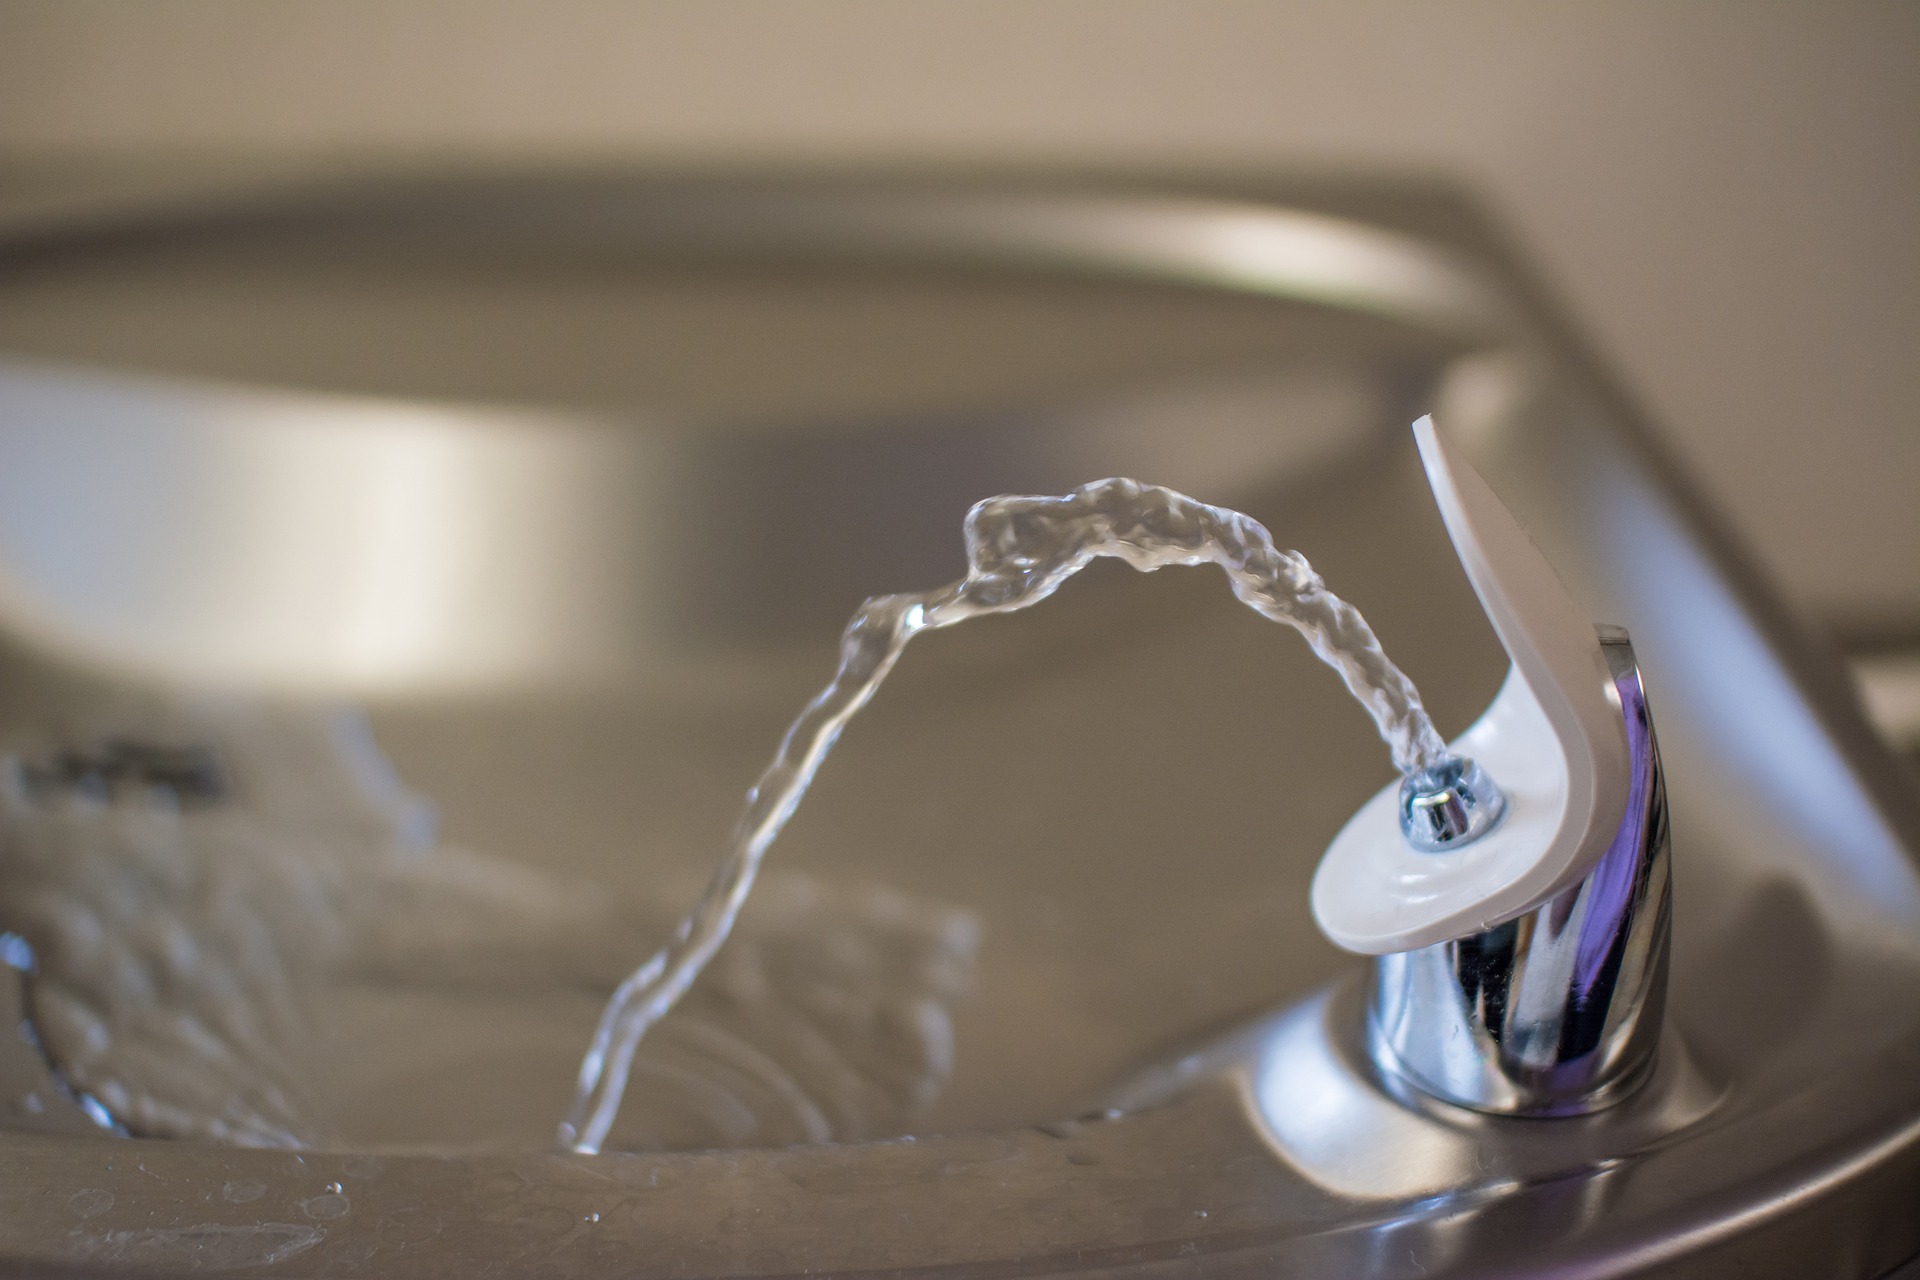 A Comprehensive Guide to Detecting and Fixing Water Leaks in Your Home